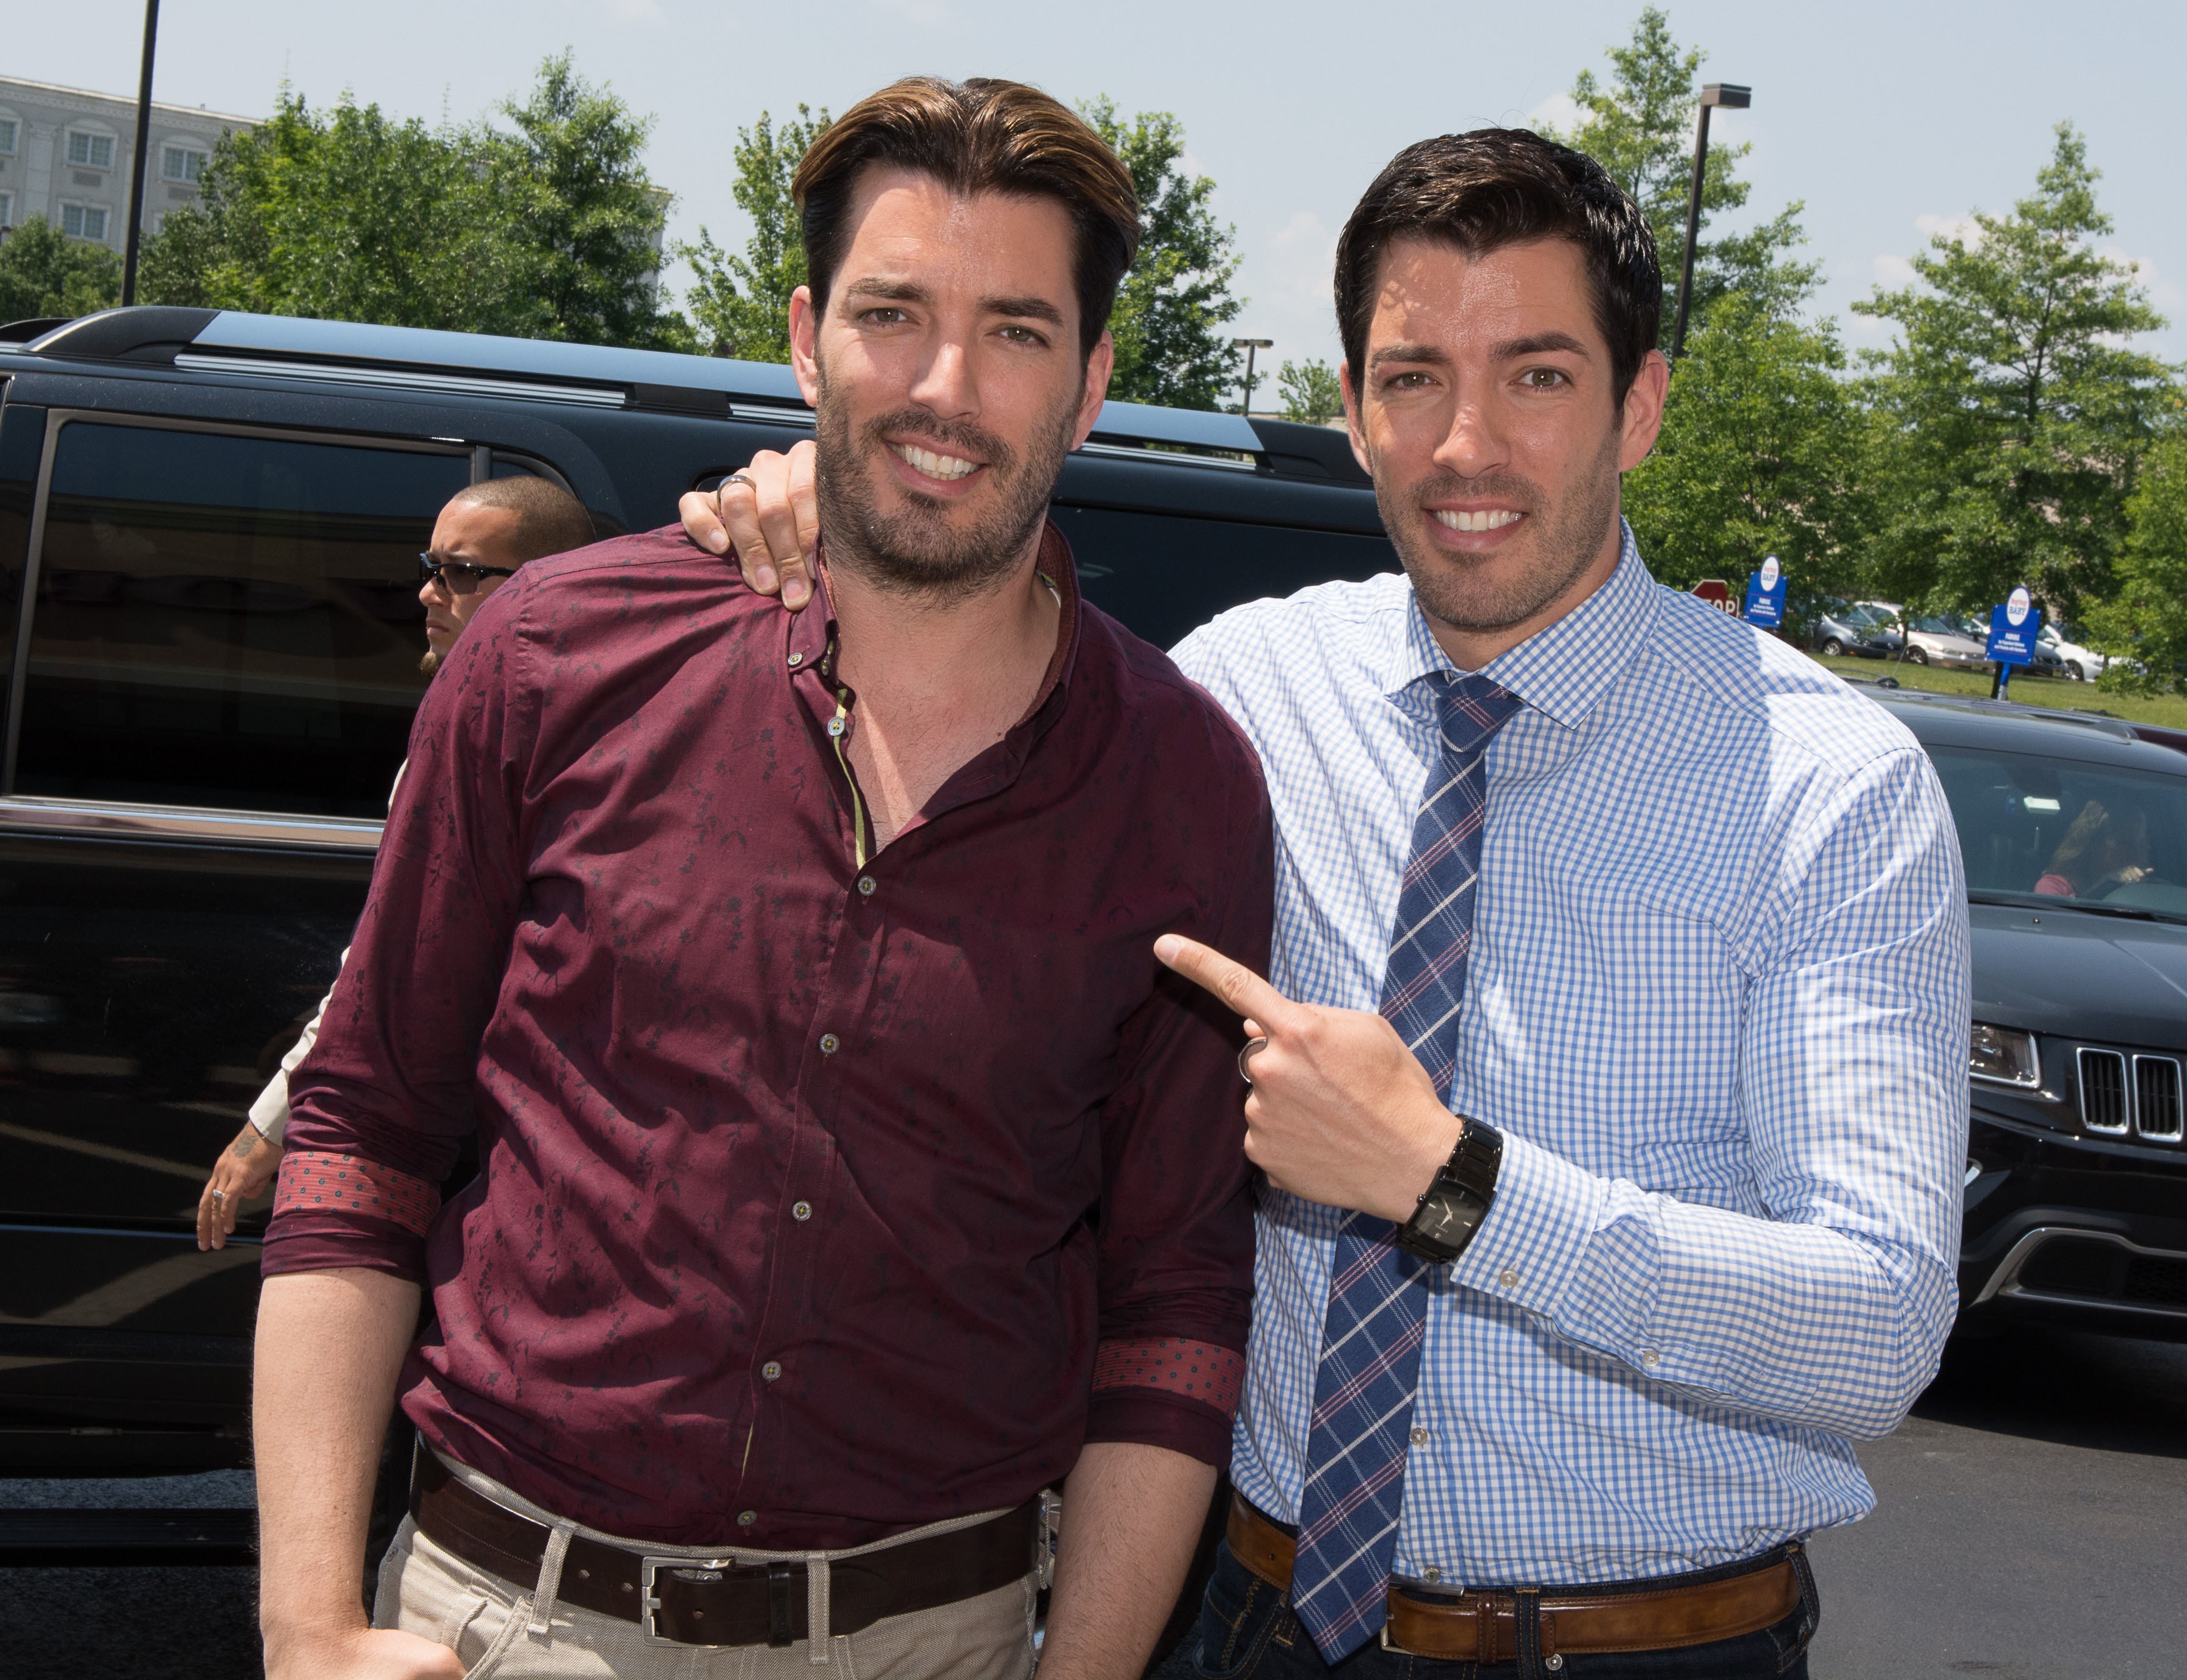 Property Brother Opens Up About His Divorce And Bankruptcy For The First Ti...